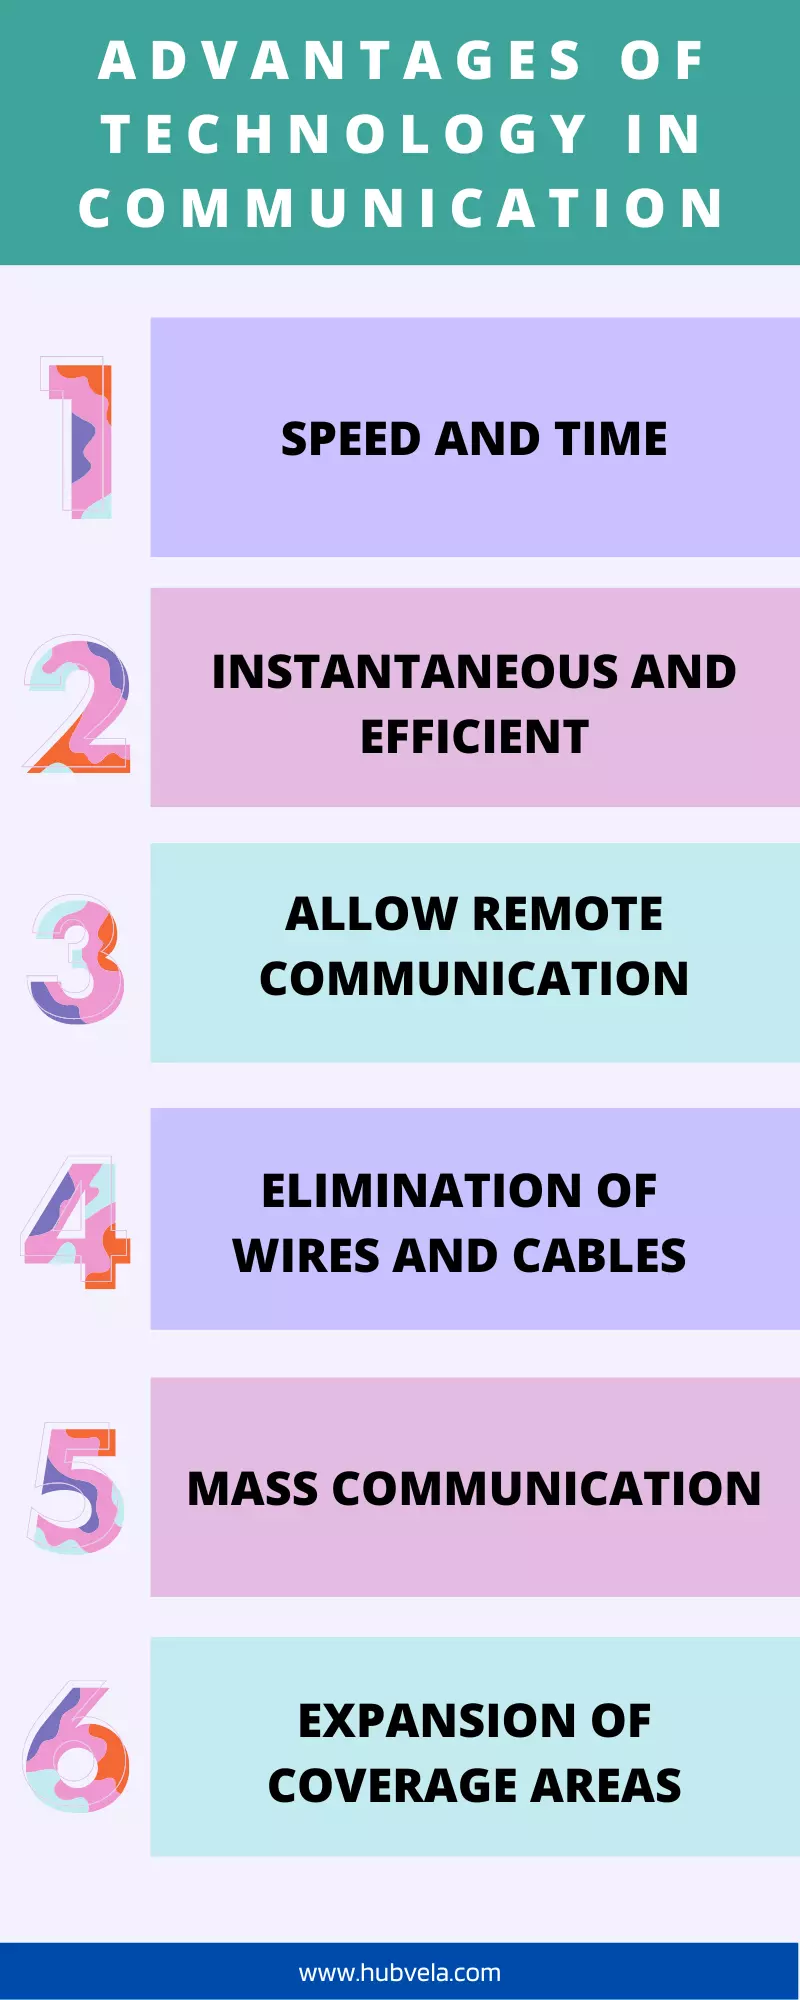 Technology advantages in communication infographic